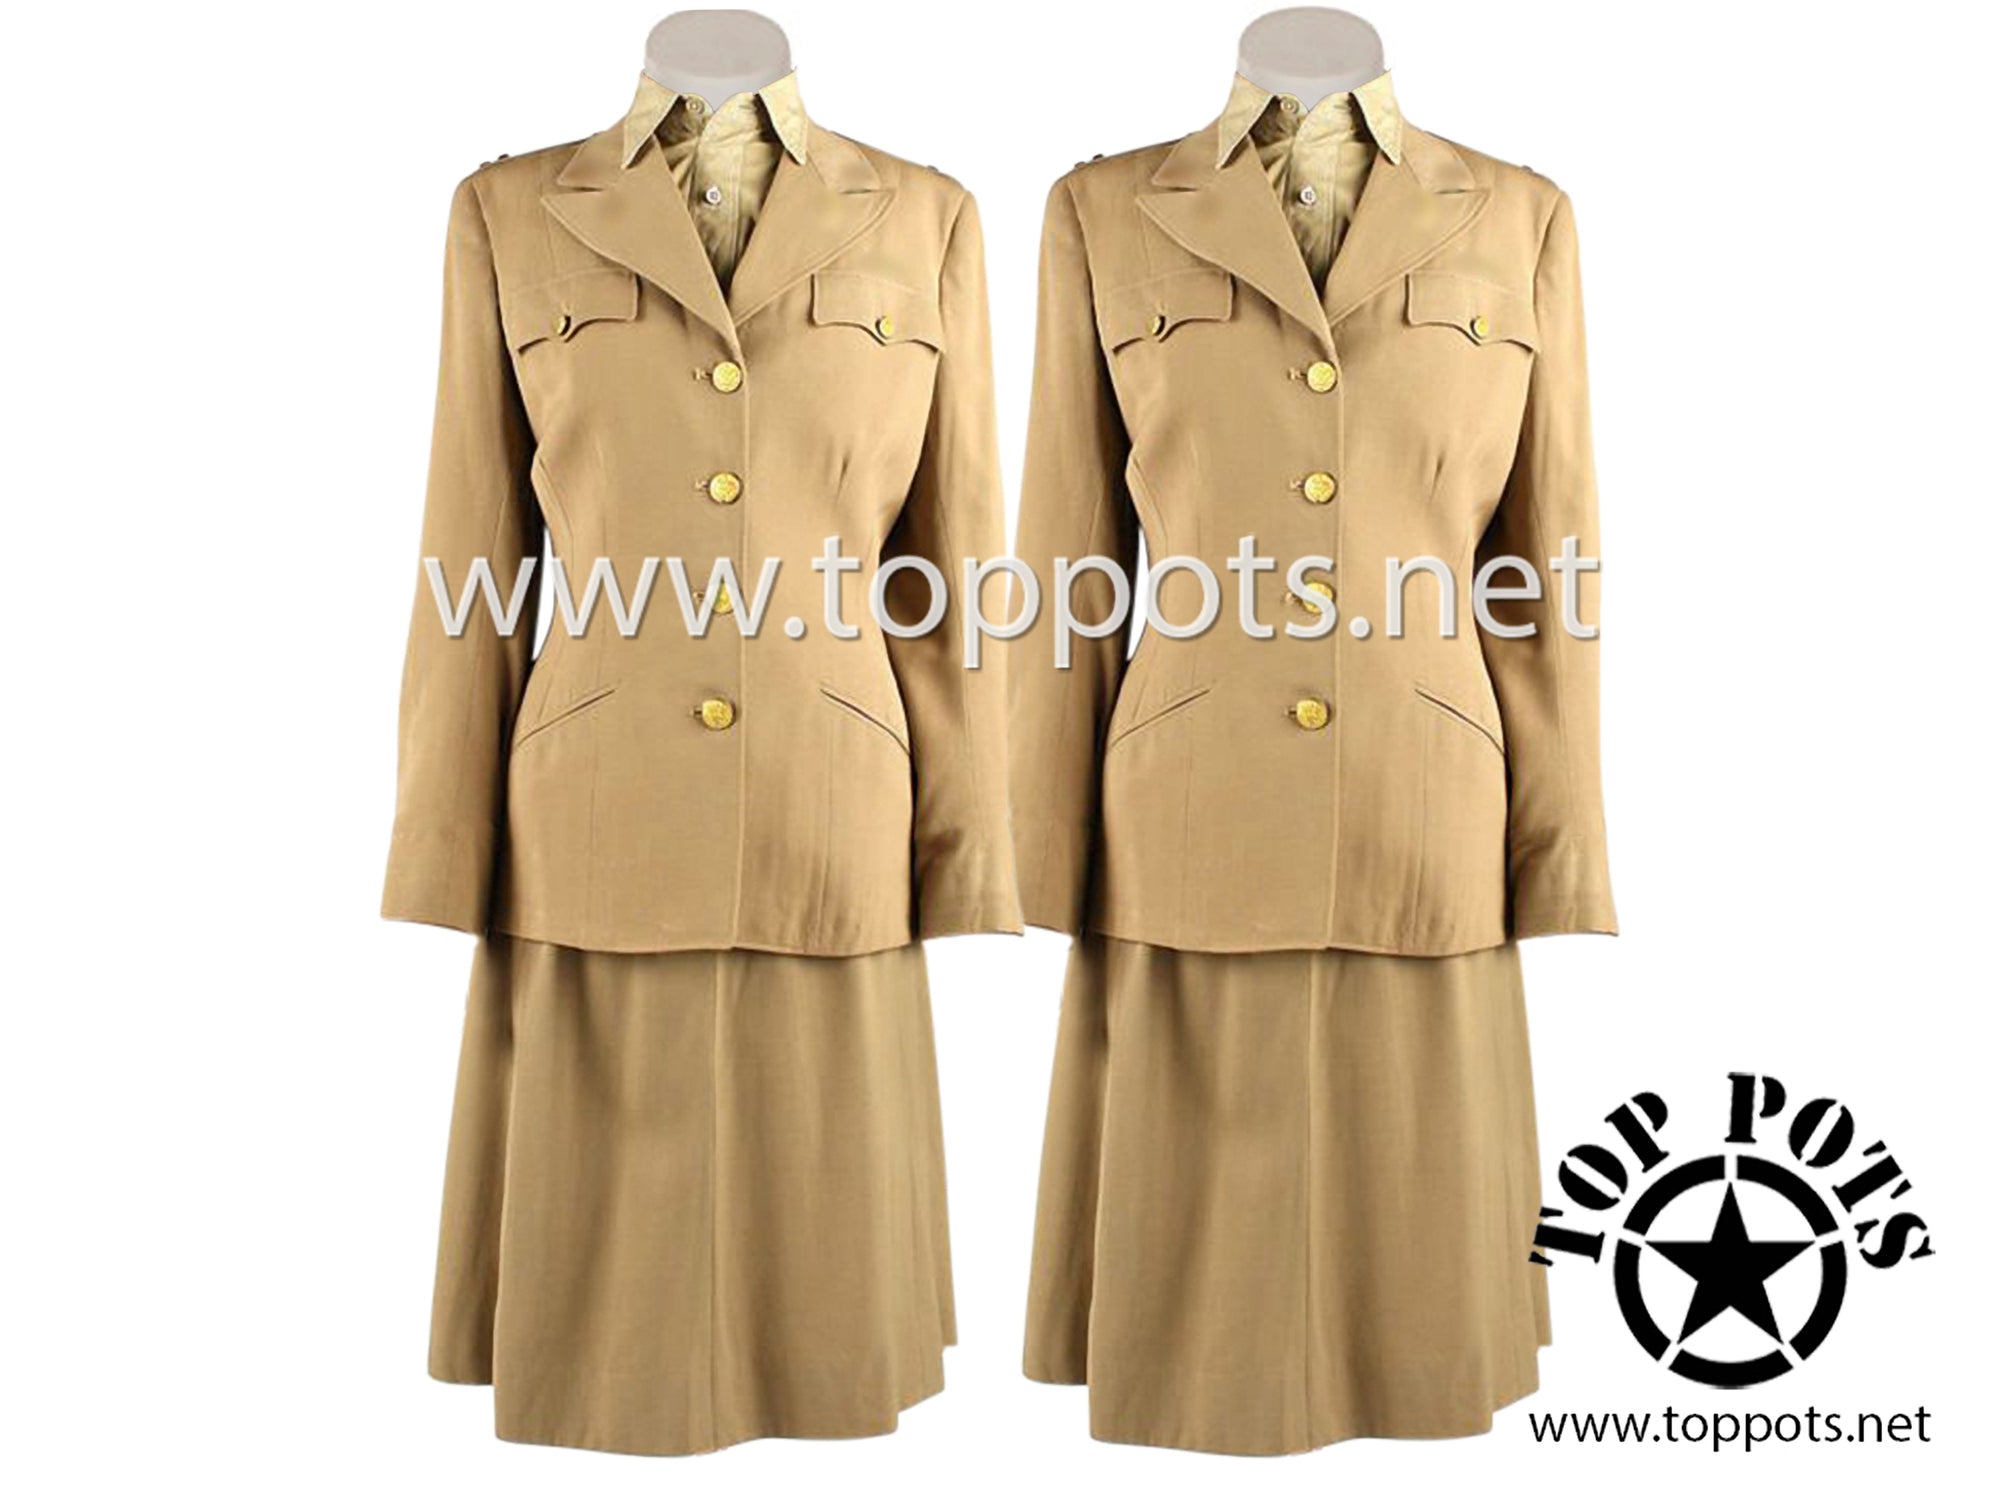 WWII US Army Reproduction Cotton Khaki Tan WAC Enlisted Summer Uniform Jacket and Skirt – Uniform Set (Coat and Skirt Only)